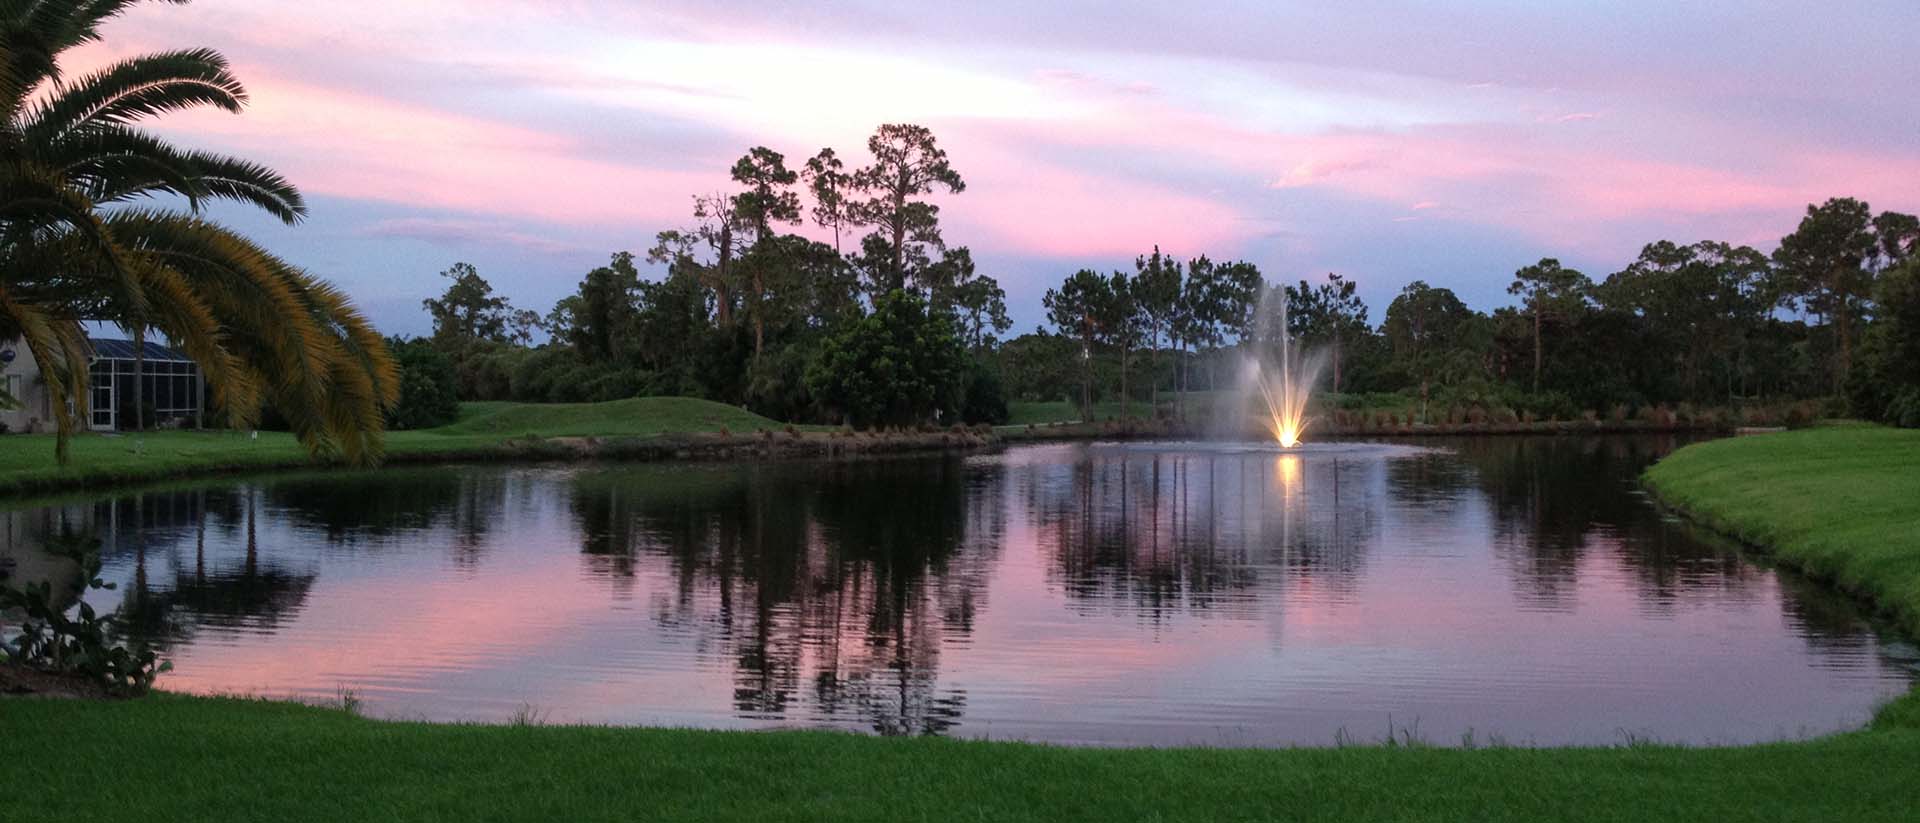 pond with fountain against a pink and purple sunset